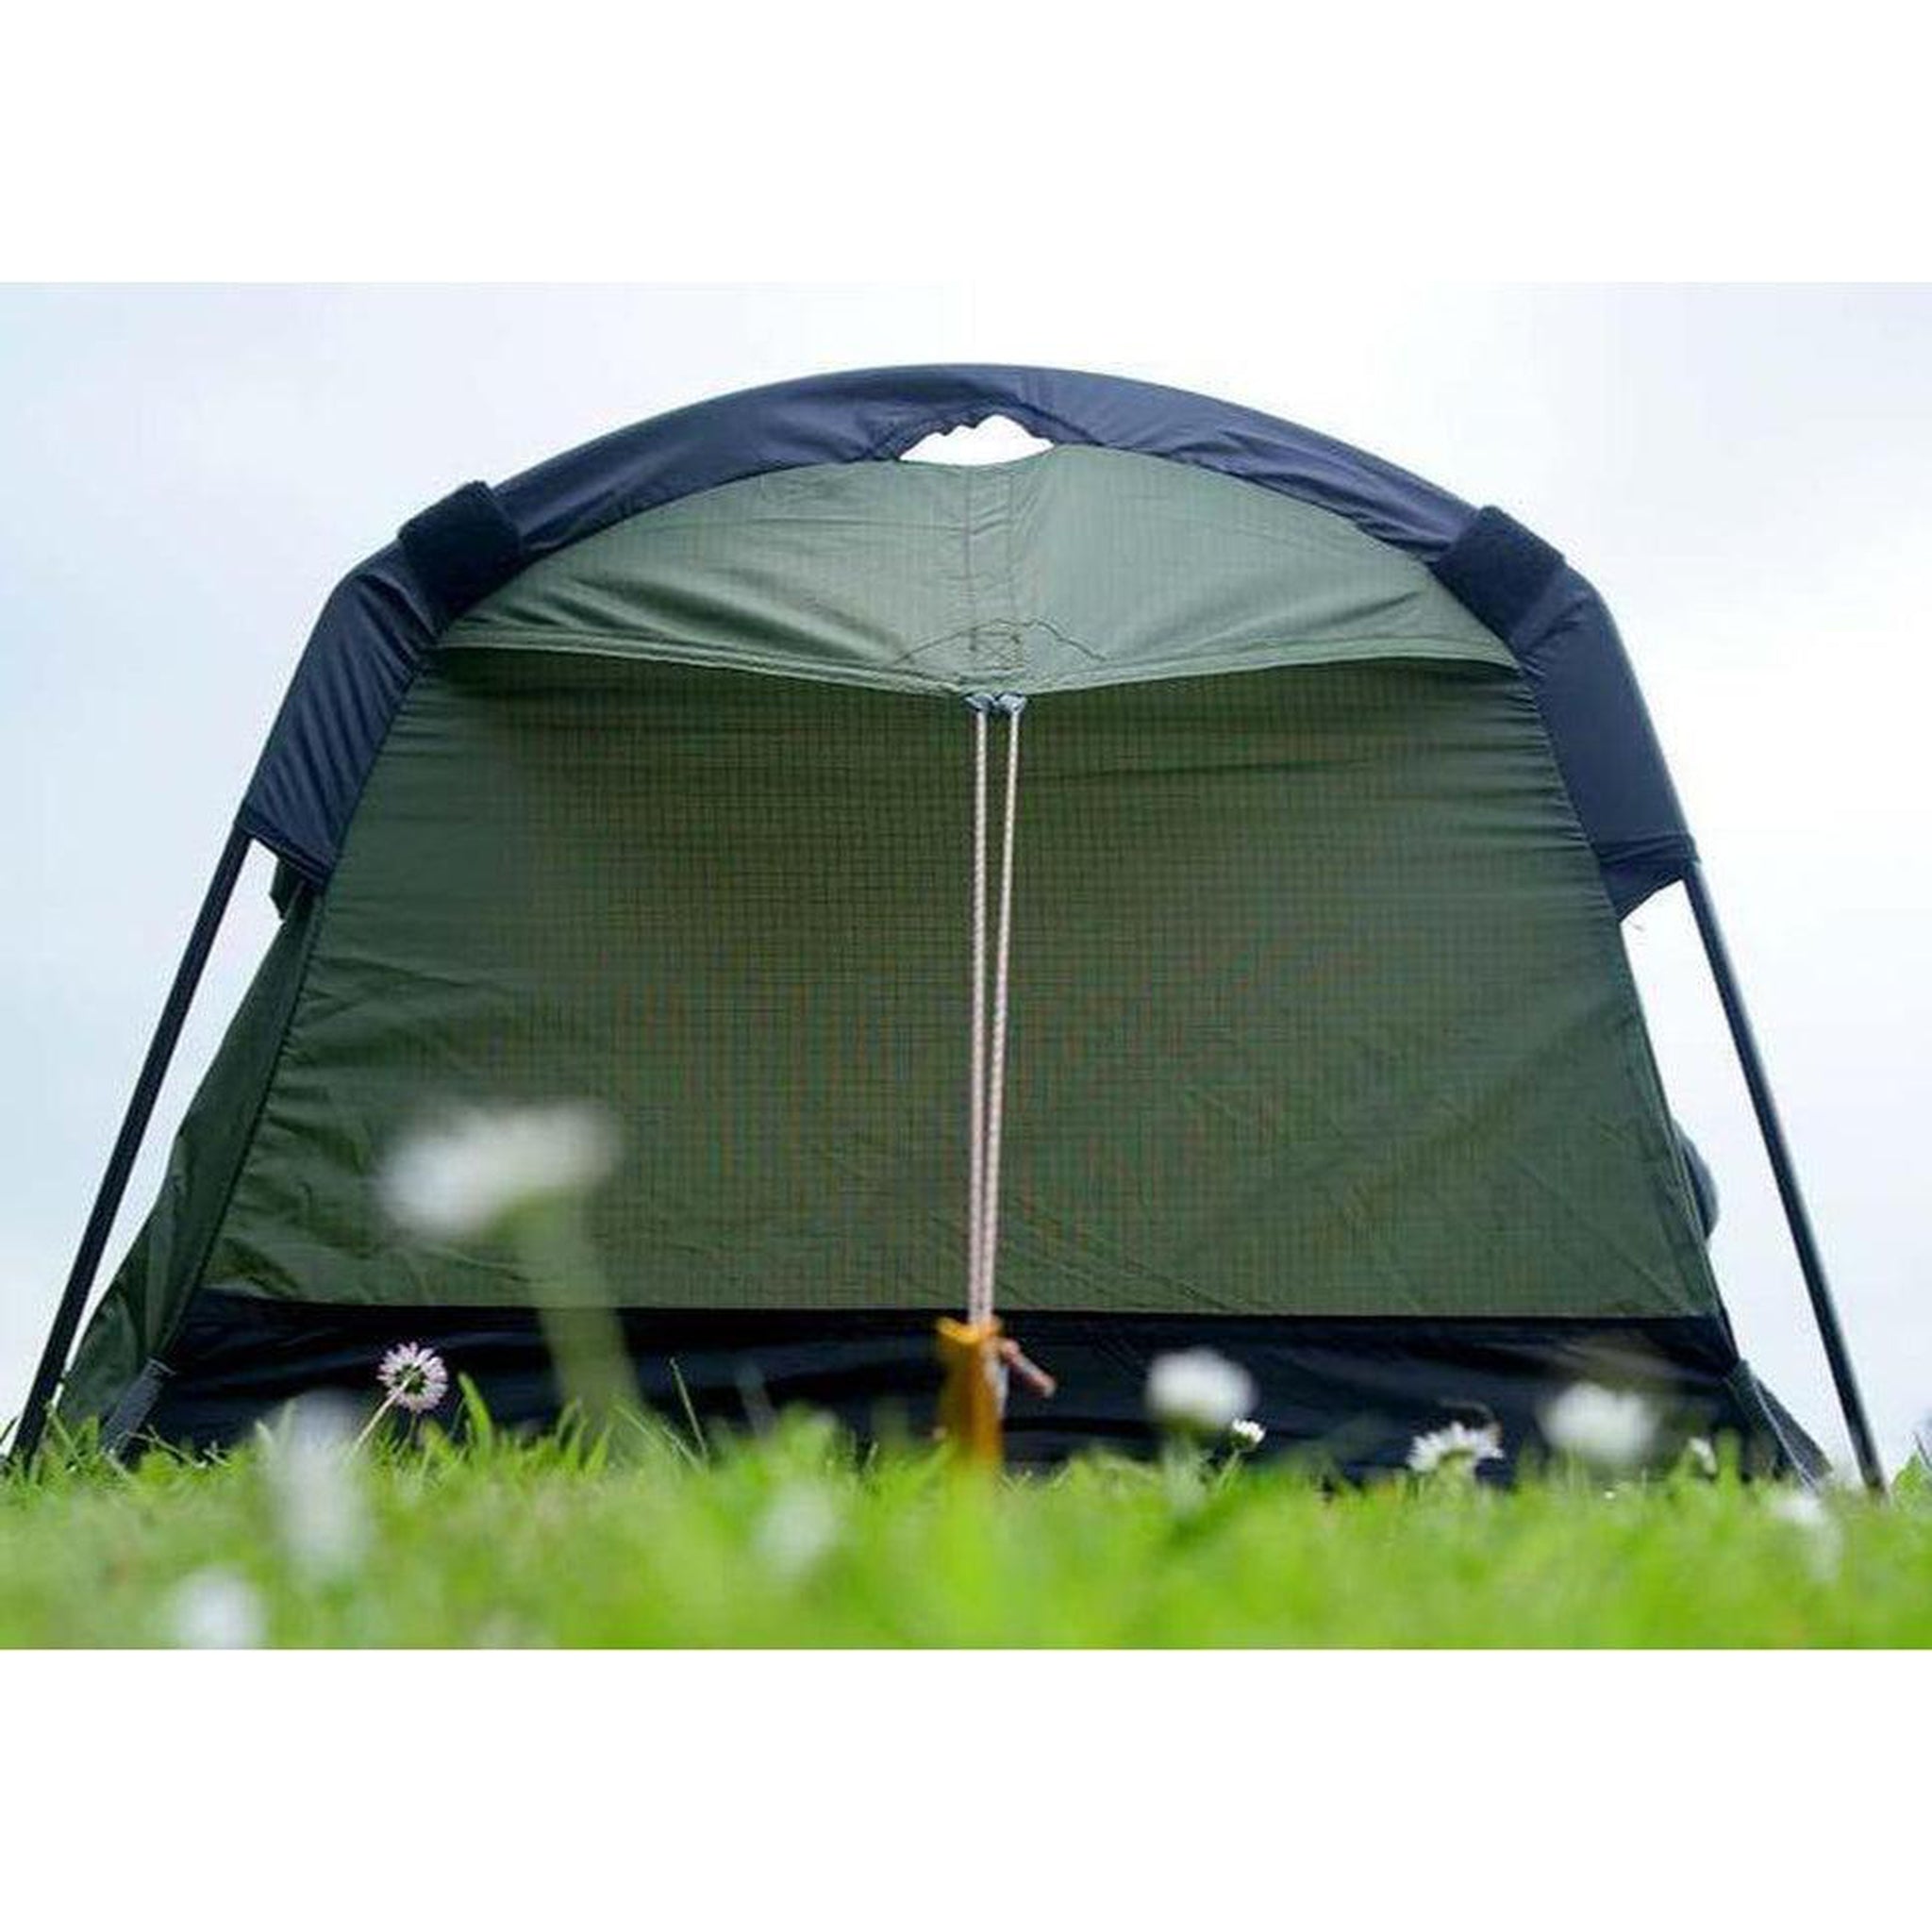 Crua Hybrid - 1 Person Tent/hammock Only Tent